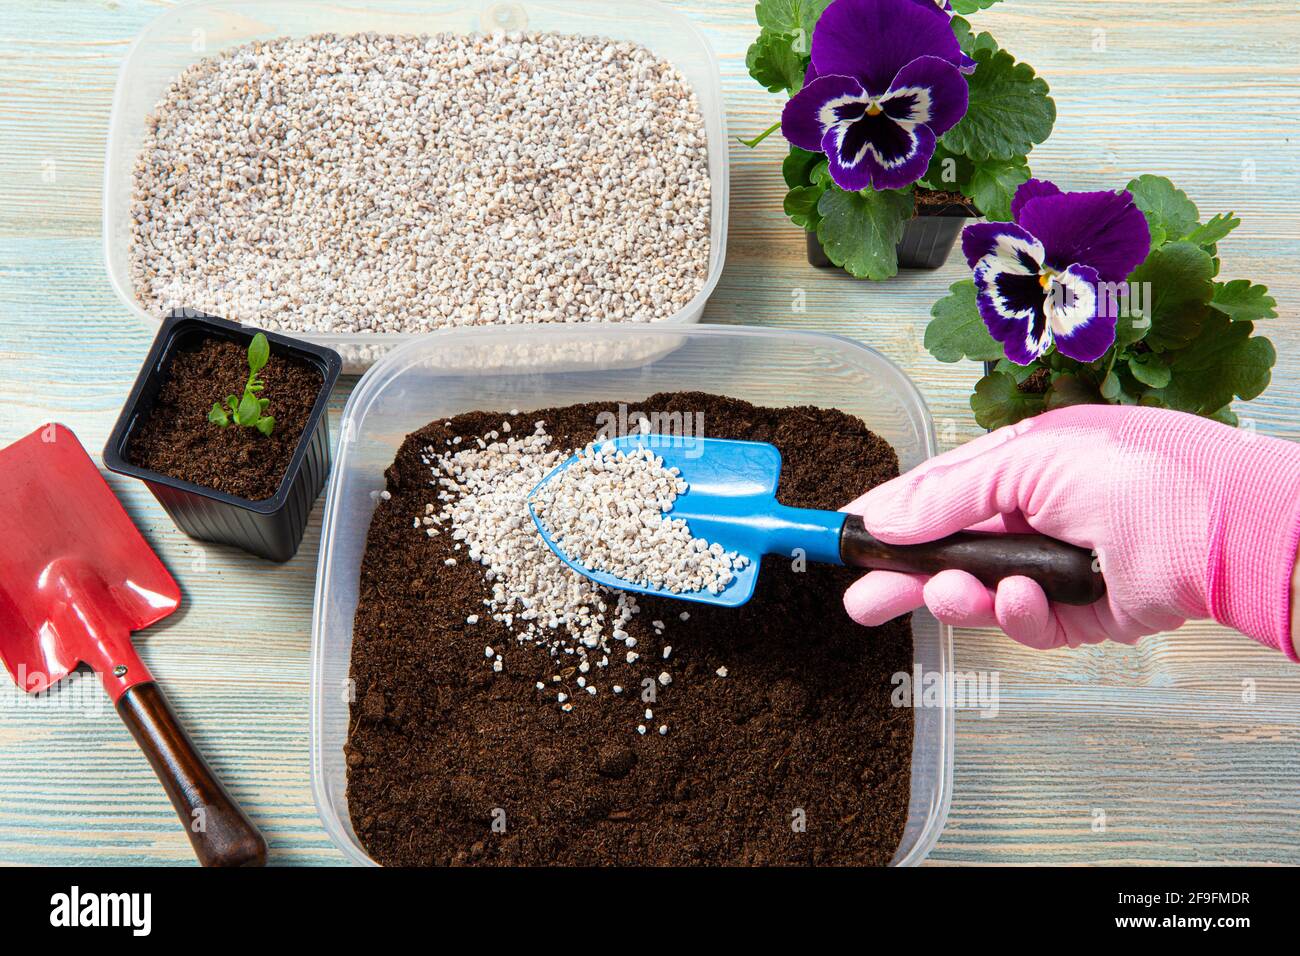 Mixing perlite granules pellets with black gardening soil improves water retention, airflow, aeration, root growth capacity of all the plants growing. Stock Photo